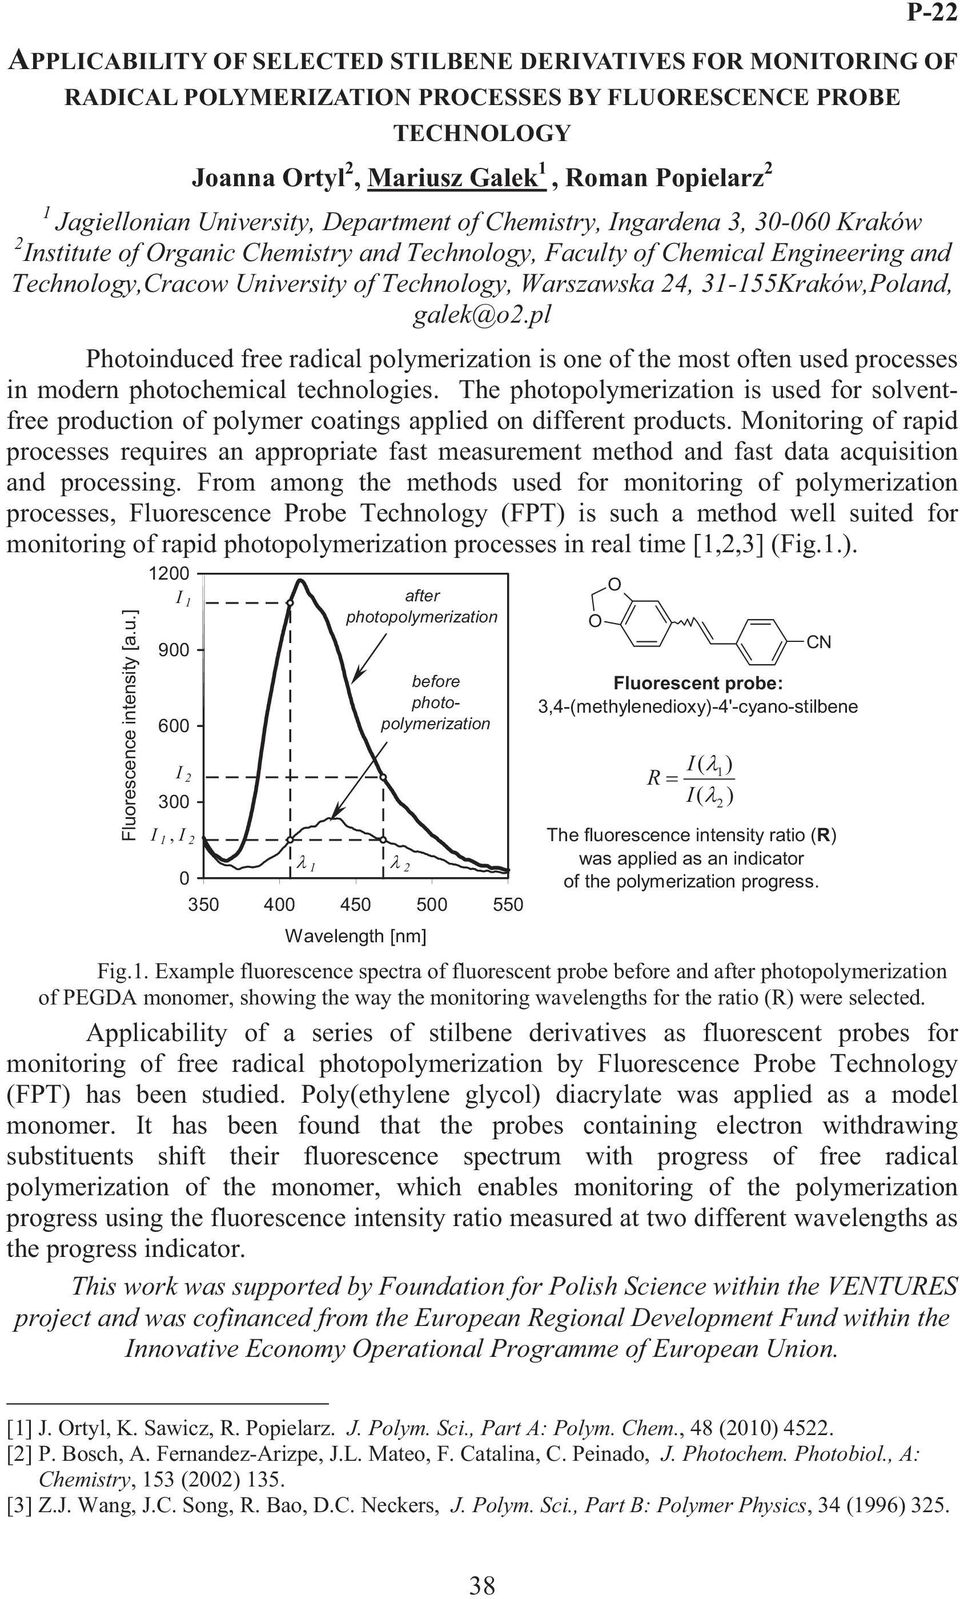 31-155Kraków,Poland, galek@o2.pl Photoinduced free radical polymerization is one of the most often used processes in modern photochemical technologies.